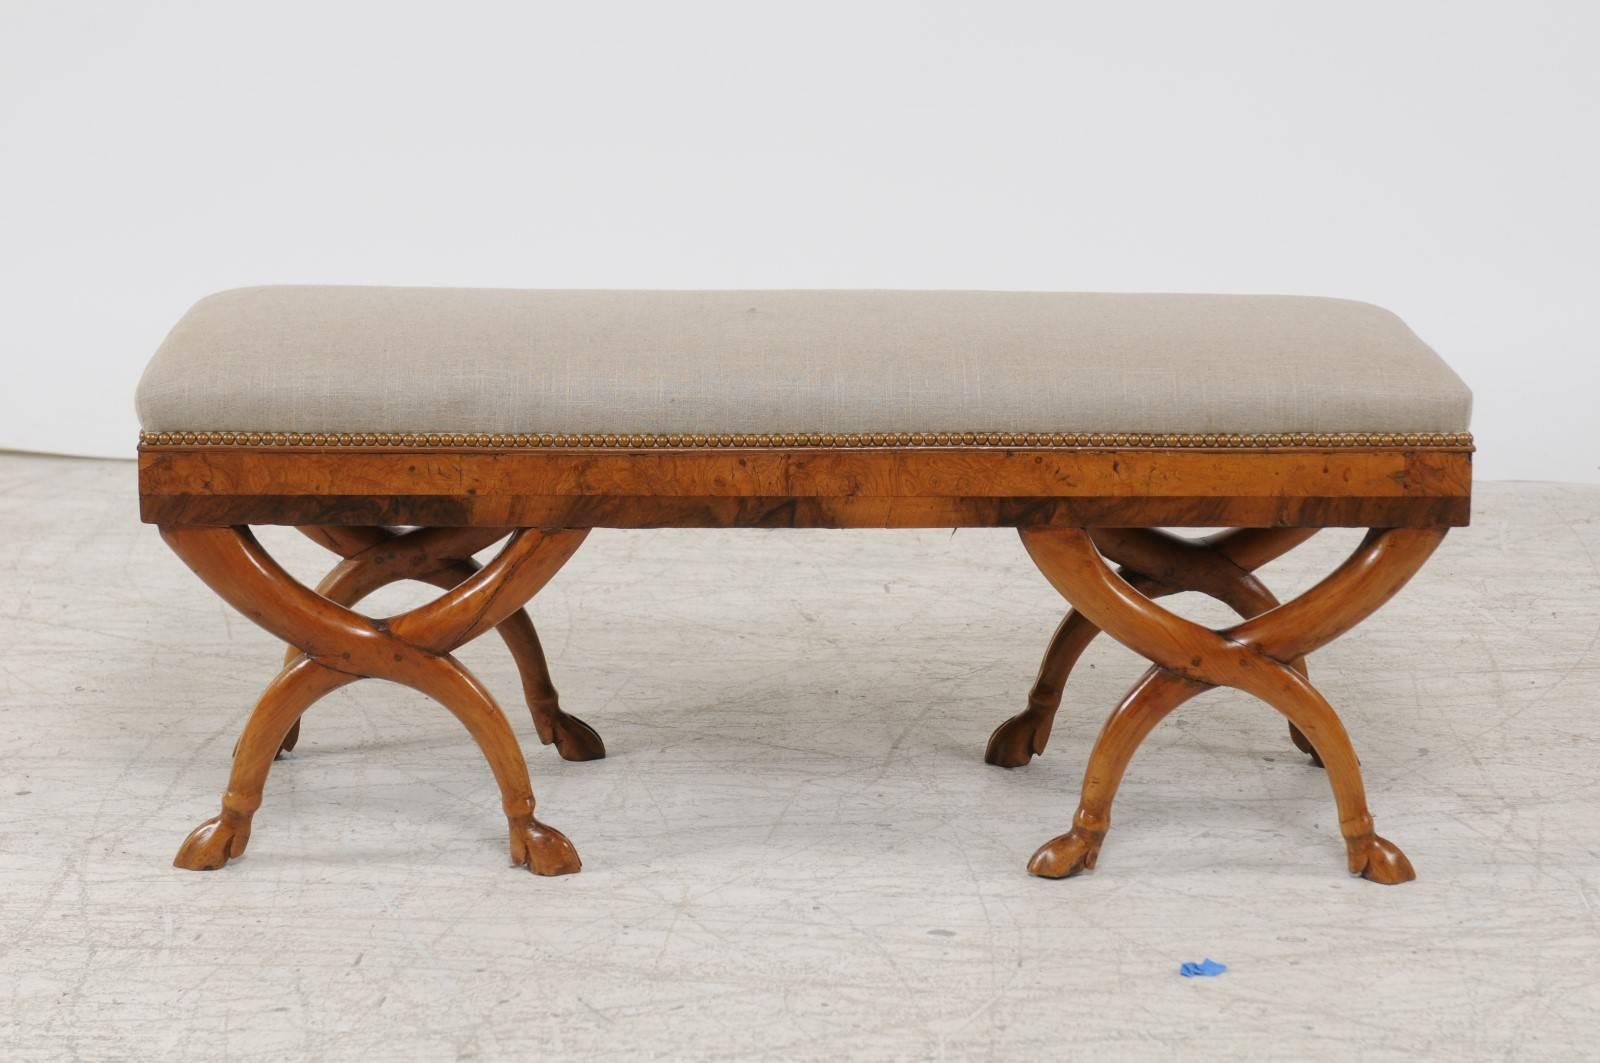 An Austrian Biedermeier double X-frame bench with burl veneer and hoofed feet from the mid-19th century and new upholstery. This exquisite Biedermeier bench features a rectangular linen upholstered seat with brass nailhead trim, sitting above a burl